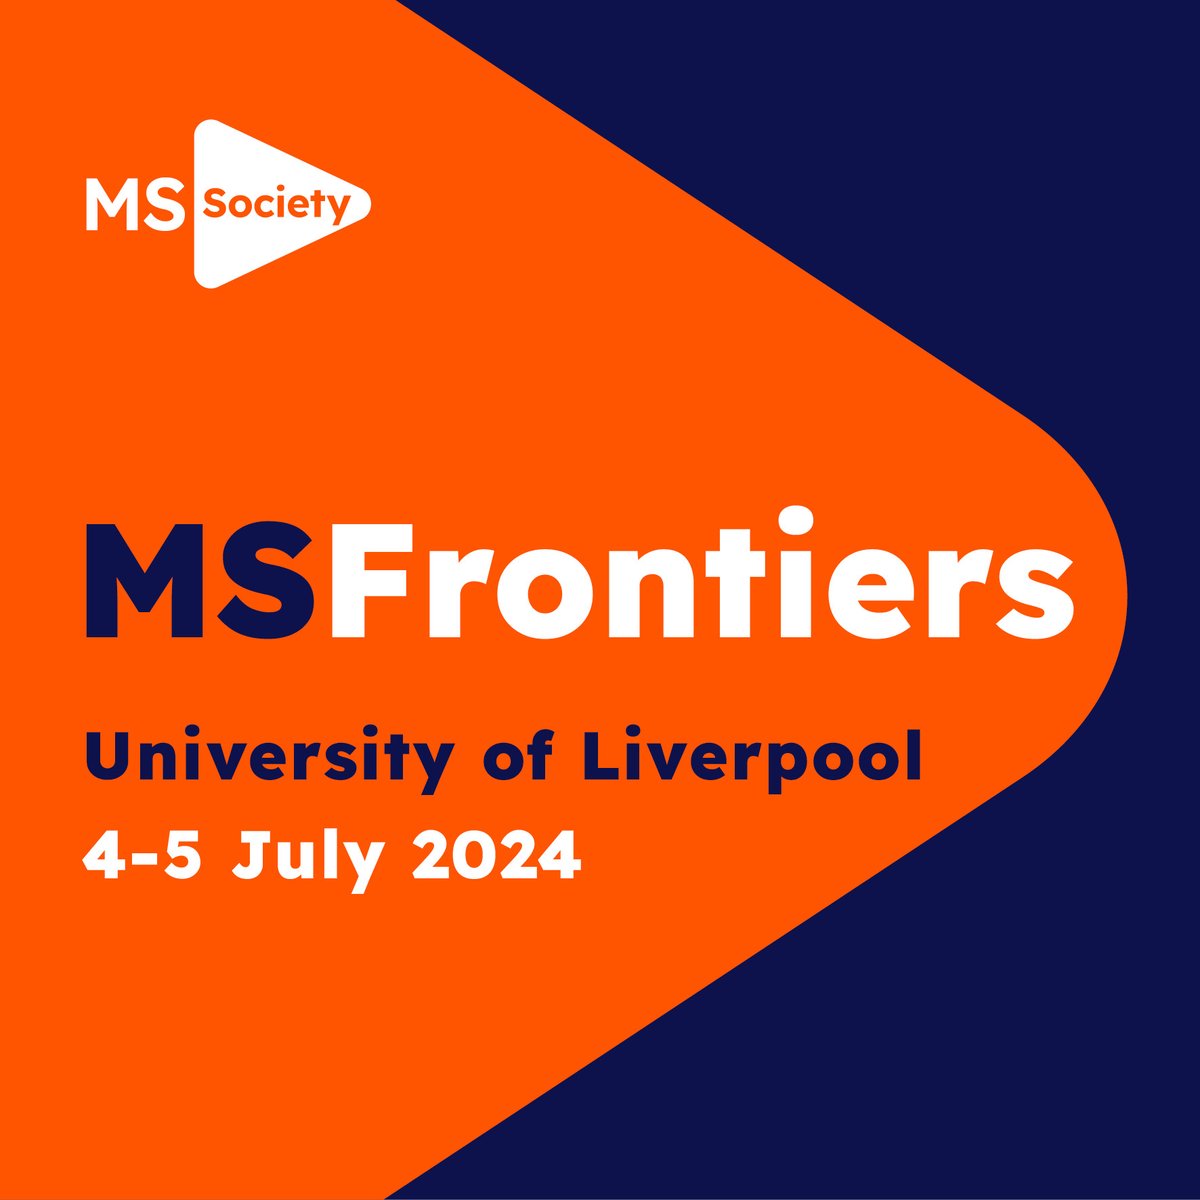 Are you planning on submitting an abstract for this years #MSFroniters ? You must register to attend MS Frontiers before the abstract closing date to be considered. The closing date for submissions is Monday 11 March at 12 noon - don't miss out mssoc.uk/4b6sEbI